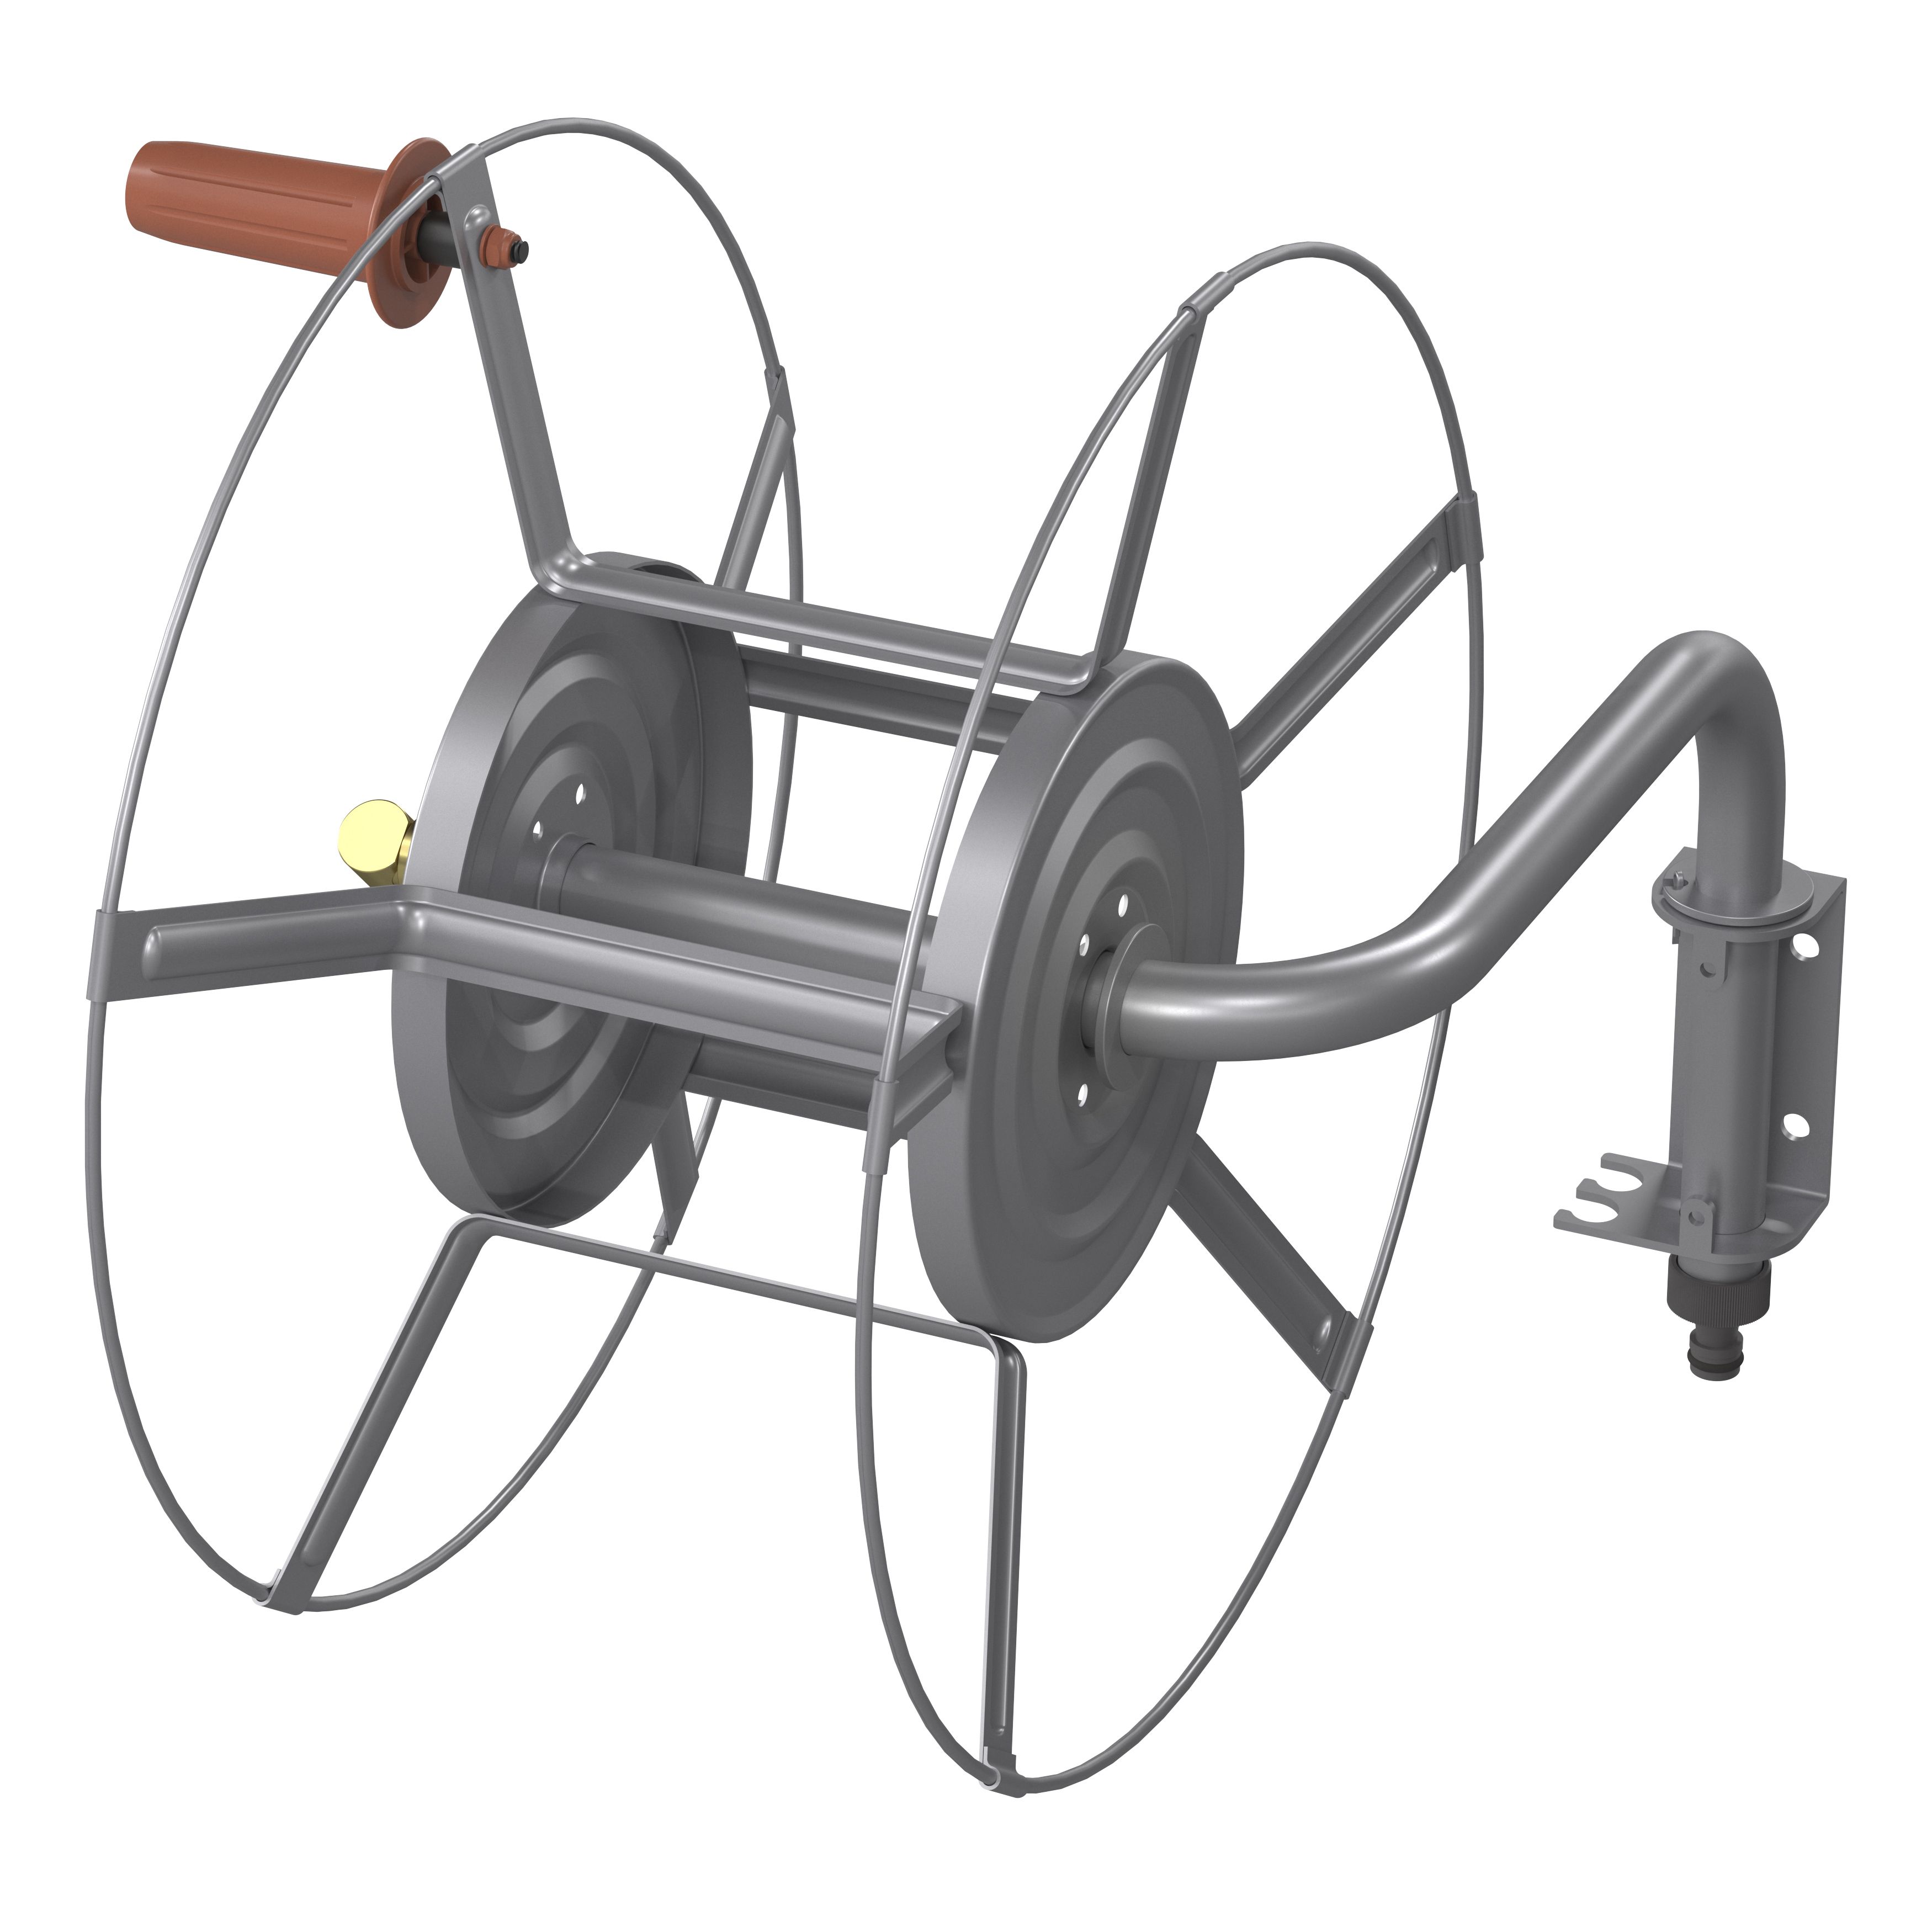 Gardena Wall Mounted Automatic Roll Up Hose Reel 1/2 / 12.5mm 30m